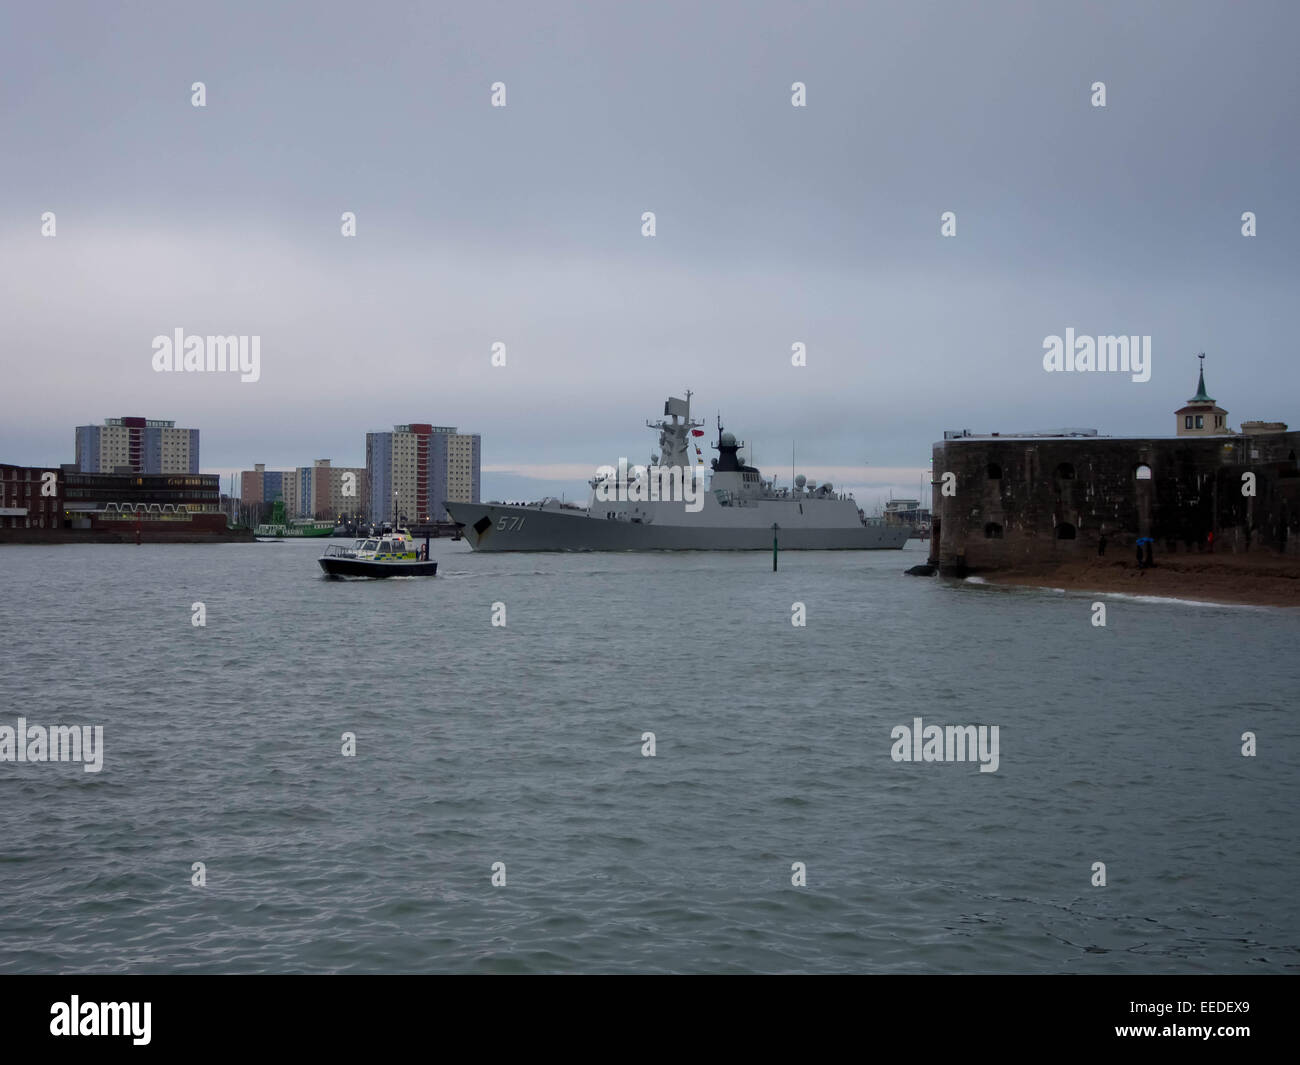 Portsmouth, England, 16th January 2015.The frigate Yun Cheng of the People's Liberation Army Navy leaves Portsmouth Harbour after a 5 day visit aimed at enhancing military understanding between the UK and China. The frigate Yun Chenga was accompanied by the assault ship Chang Bai Shan  and the replenishment ship Chaohu. Credit:  simon evans/Alamy Live News Stock Photo